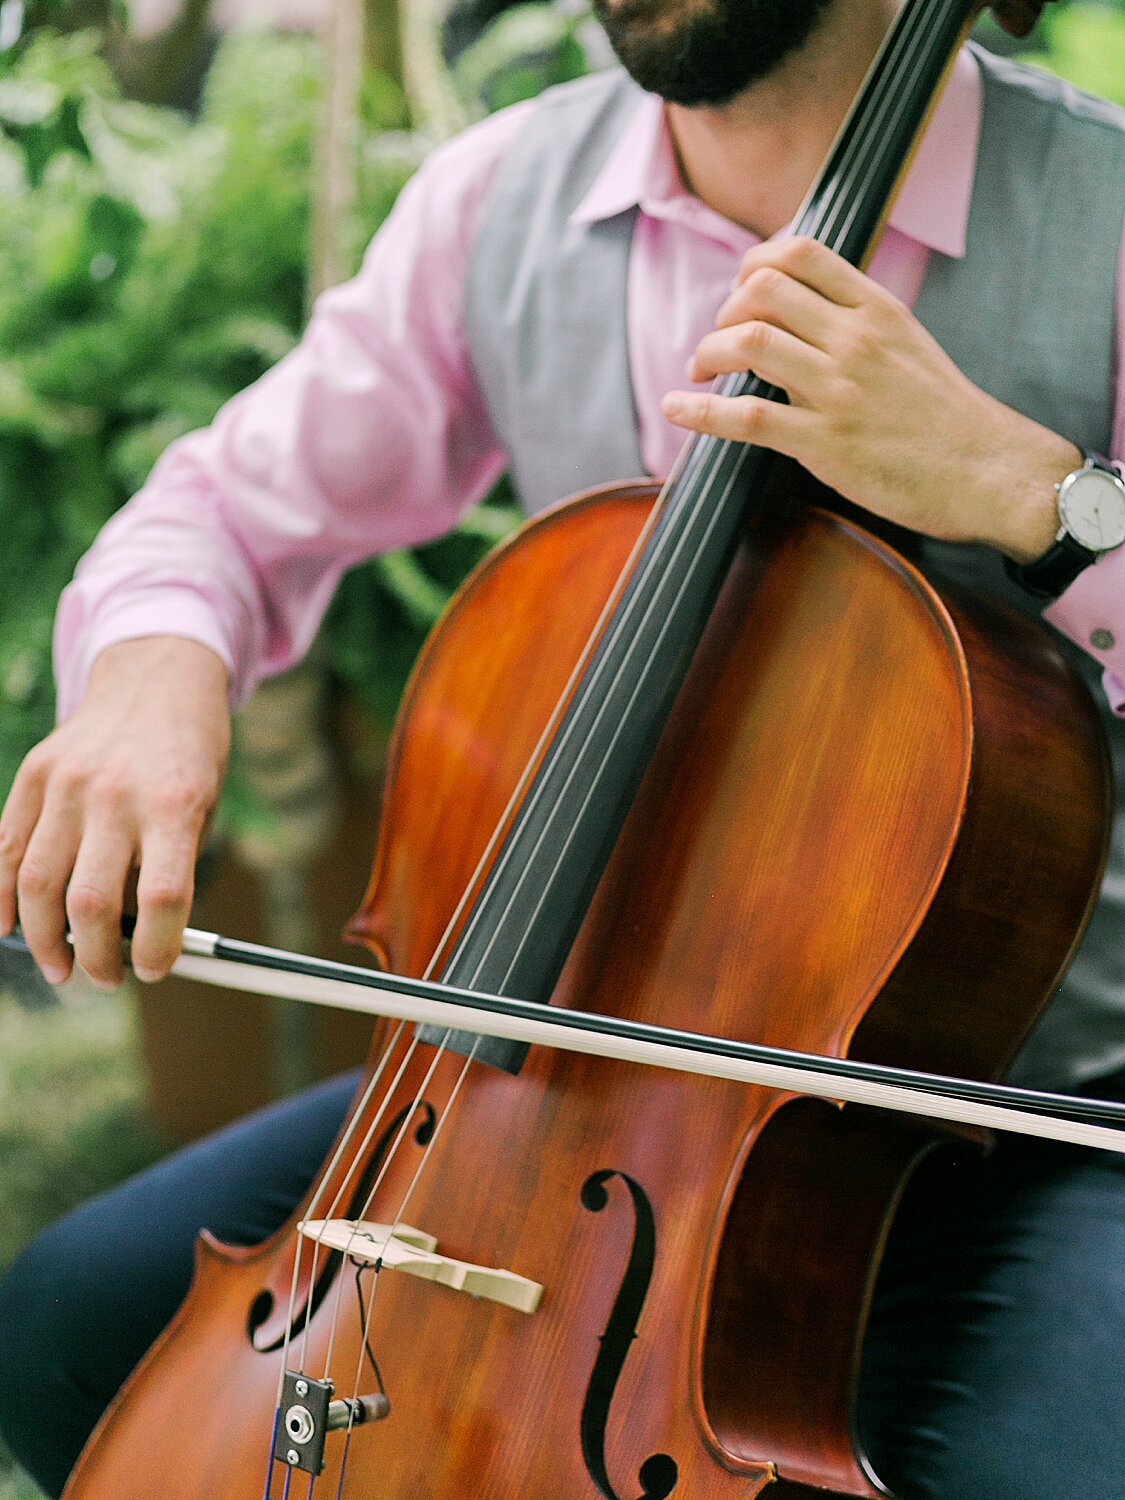 cellist performs during wedding reception | Stylish Private Home Wedding Inspiration | Asher Gardner Photography